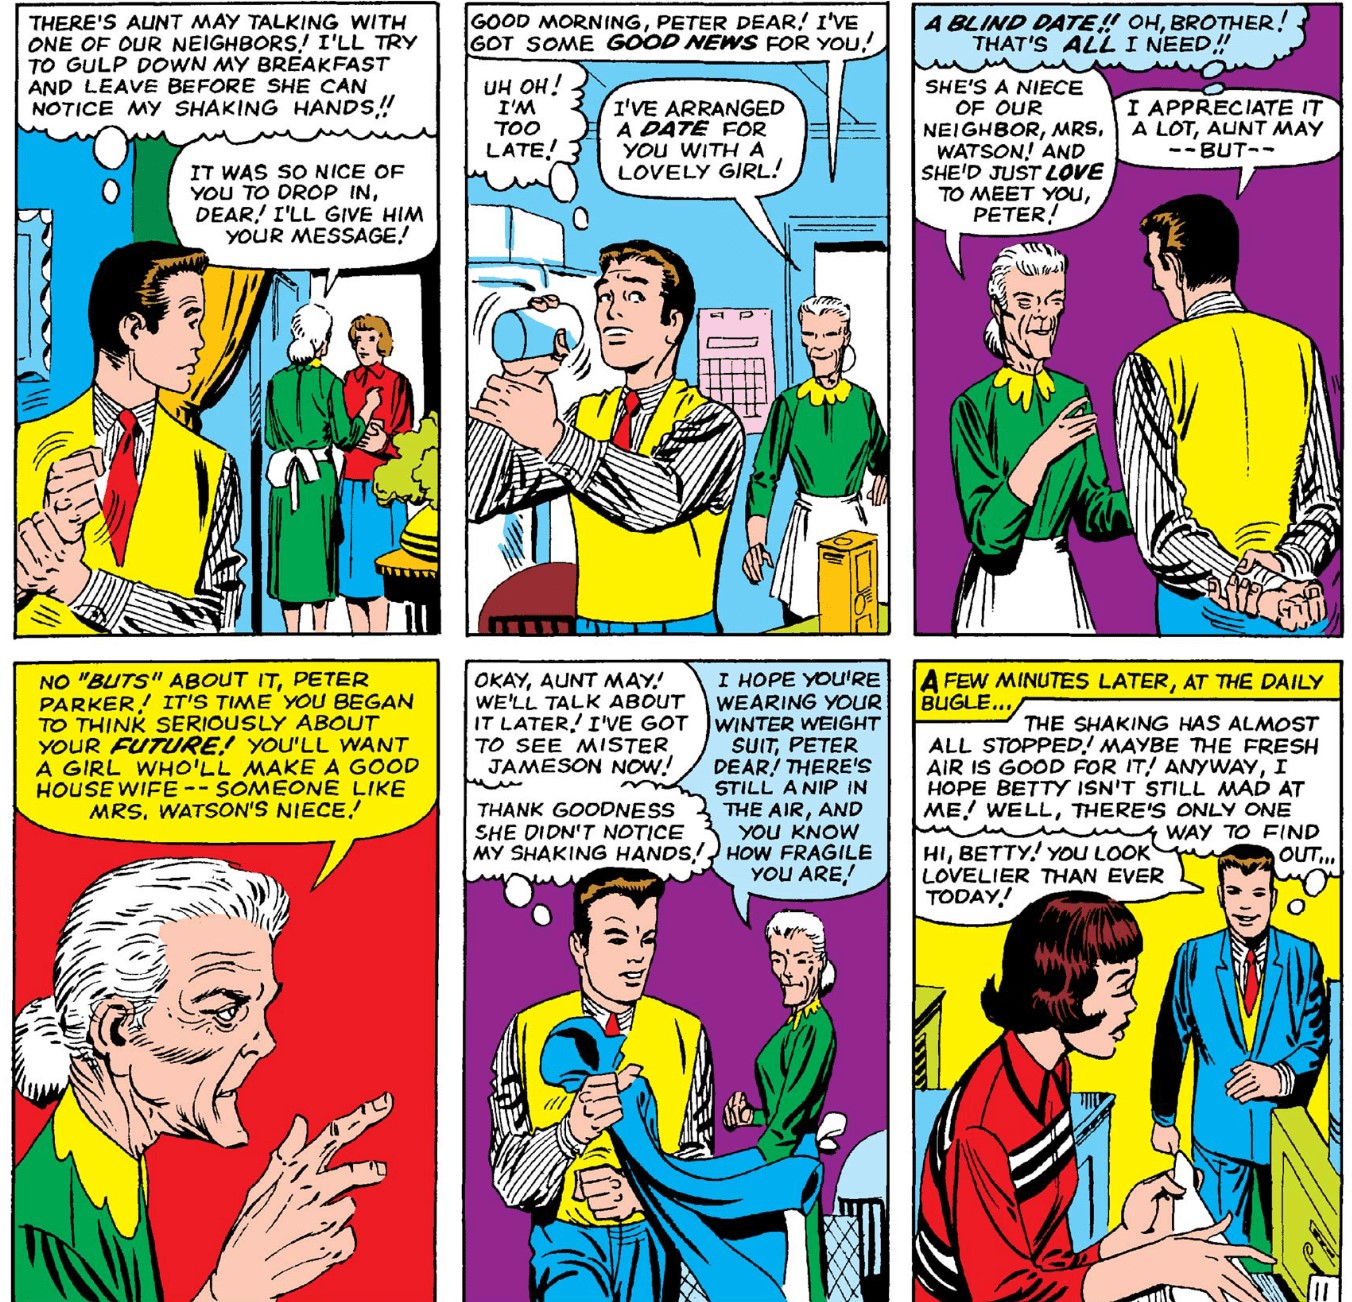 Aunt May arranges a blind date For Peter